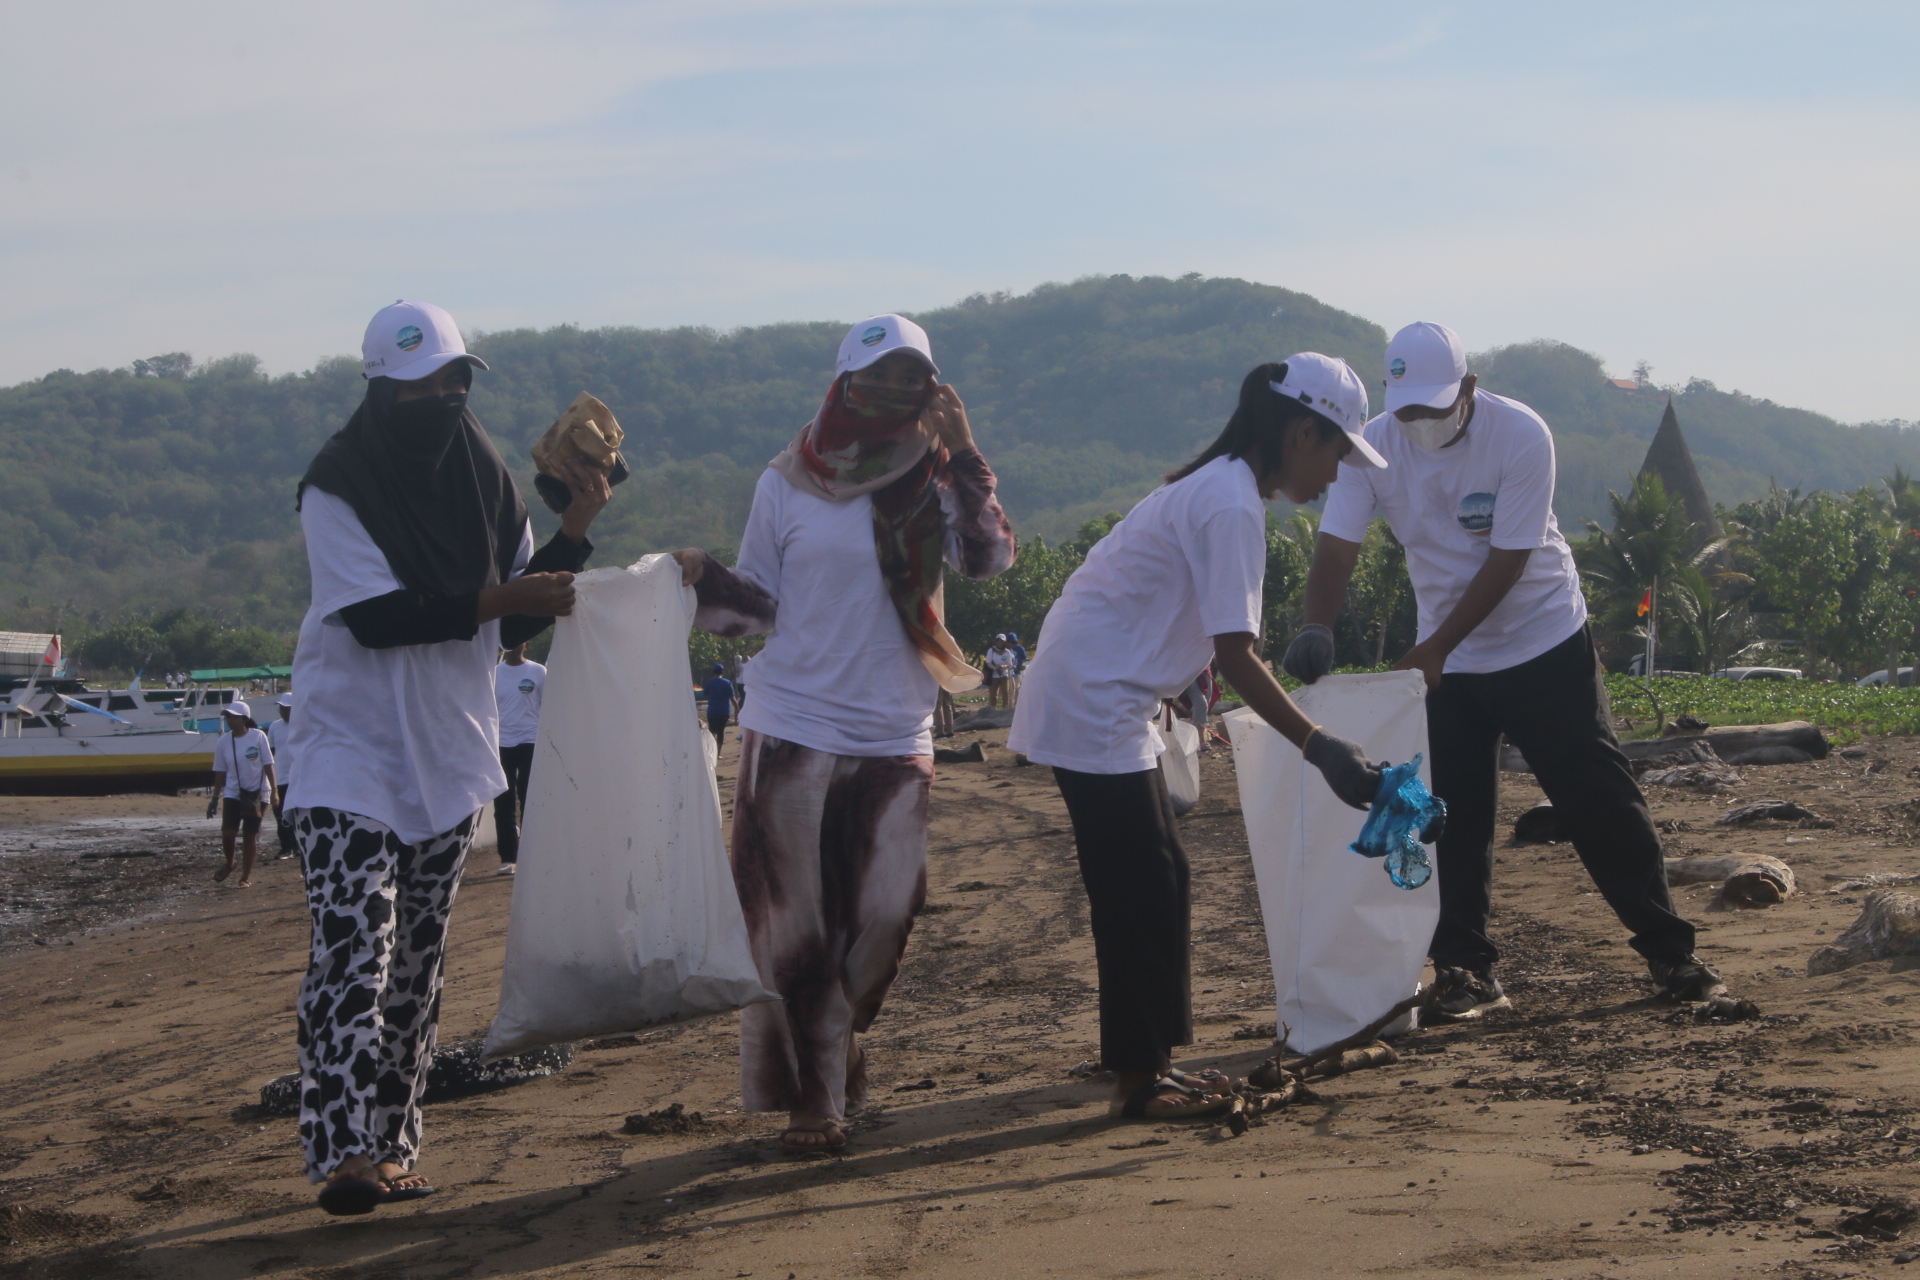 The Indonesian Interfaith Waste Charity Movement  (GRADASI) in Labuan Bajo together with around 200 community members held a beach clean-up in the Gorontalo Beach area, Labuan Bajo, East Nusa Tenggara. 